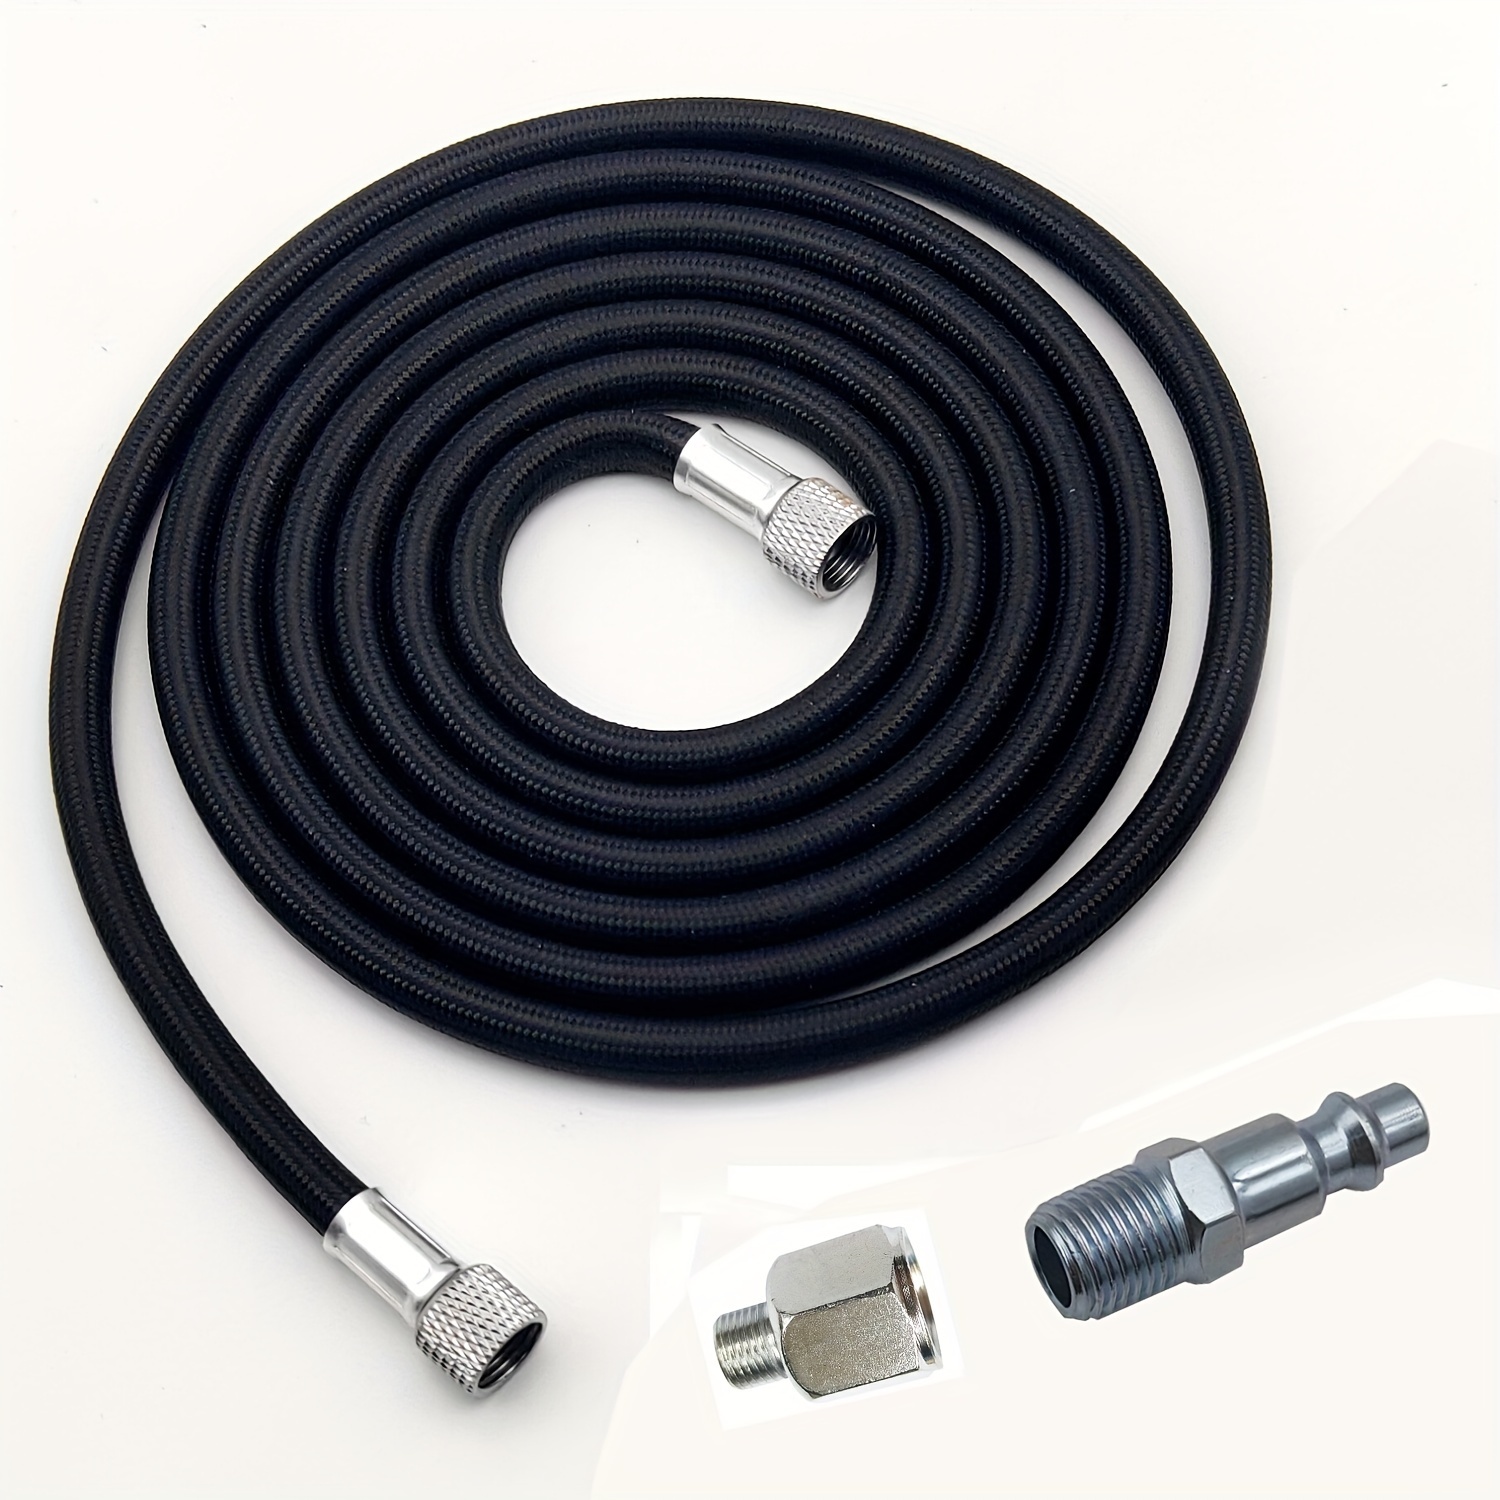 

6' Braided Airbrush Air Hose With Paasche & 1/4" Fitting Ends Regulator Compressor